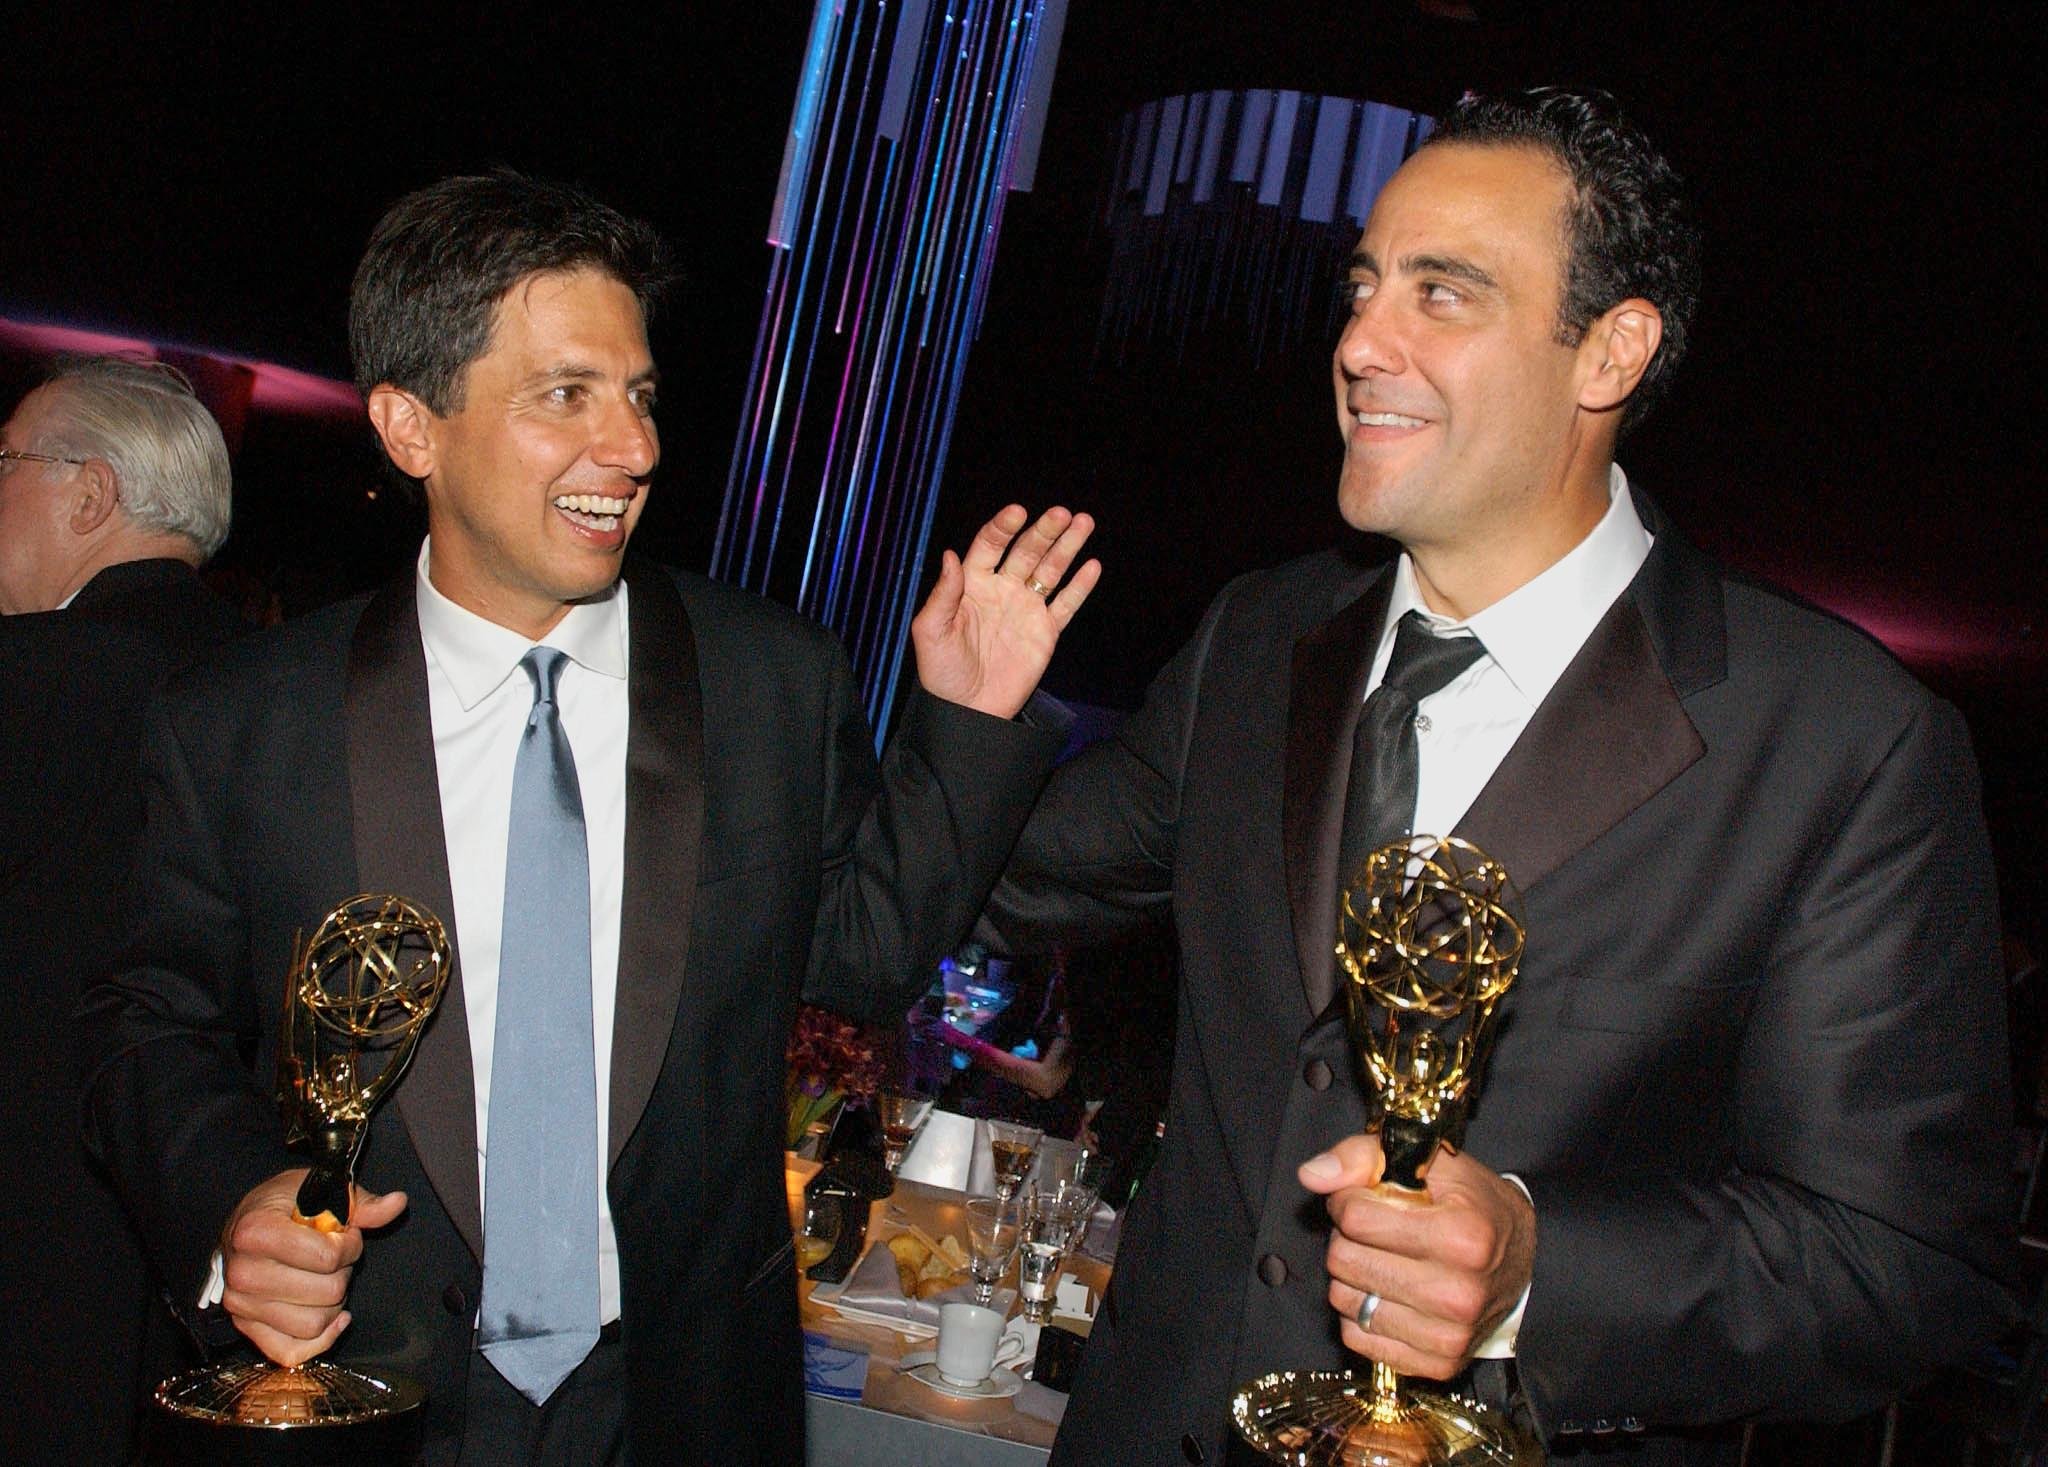 Ray Romano (L) and co-star Brad Garrett (R) celebrate their Emmy wins at the Governor's Ball following the 54th Annual Emmy Awards at the Shrine Auditorium